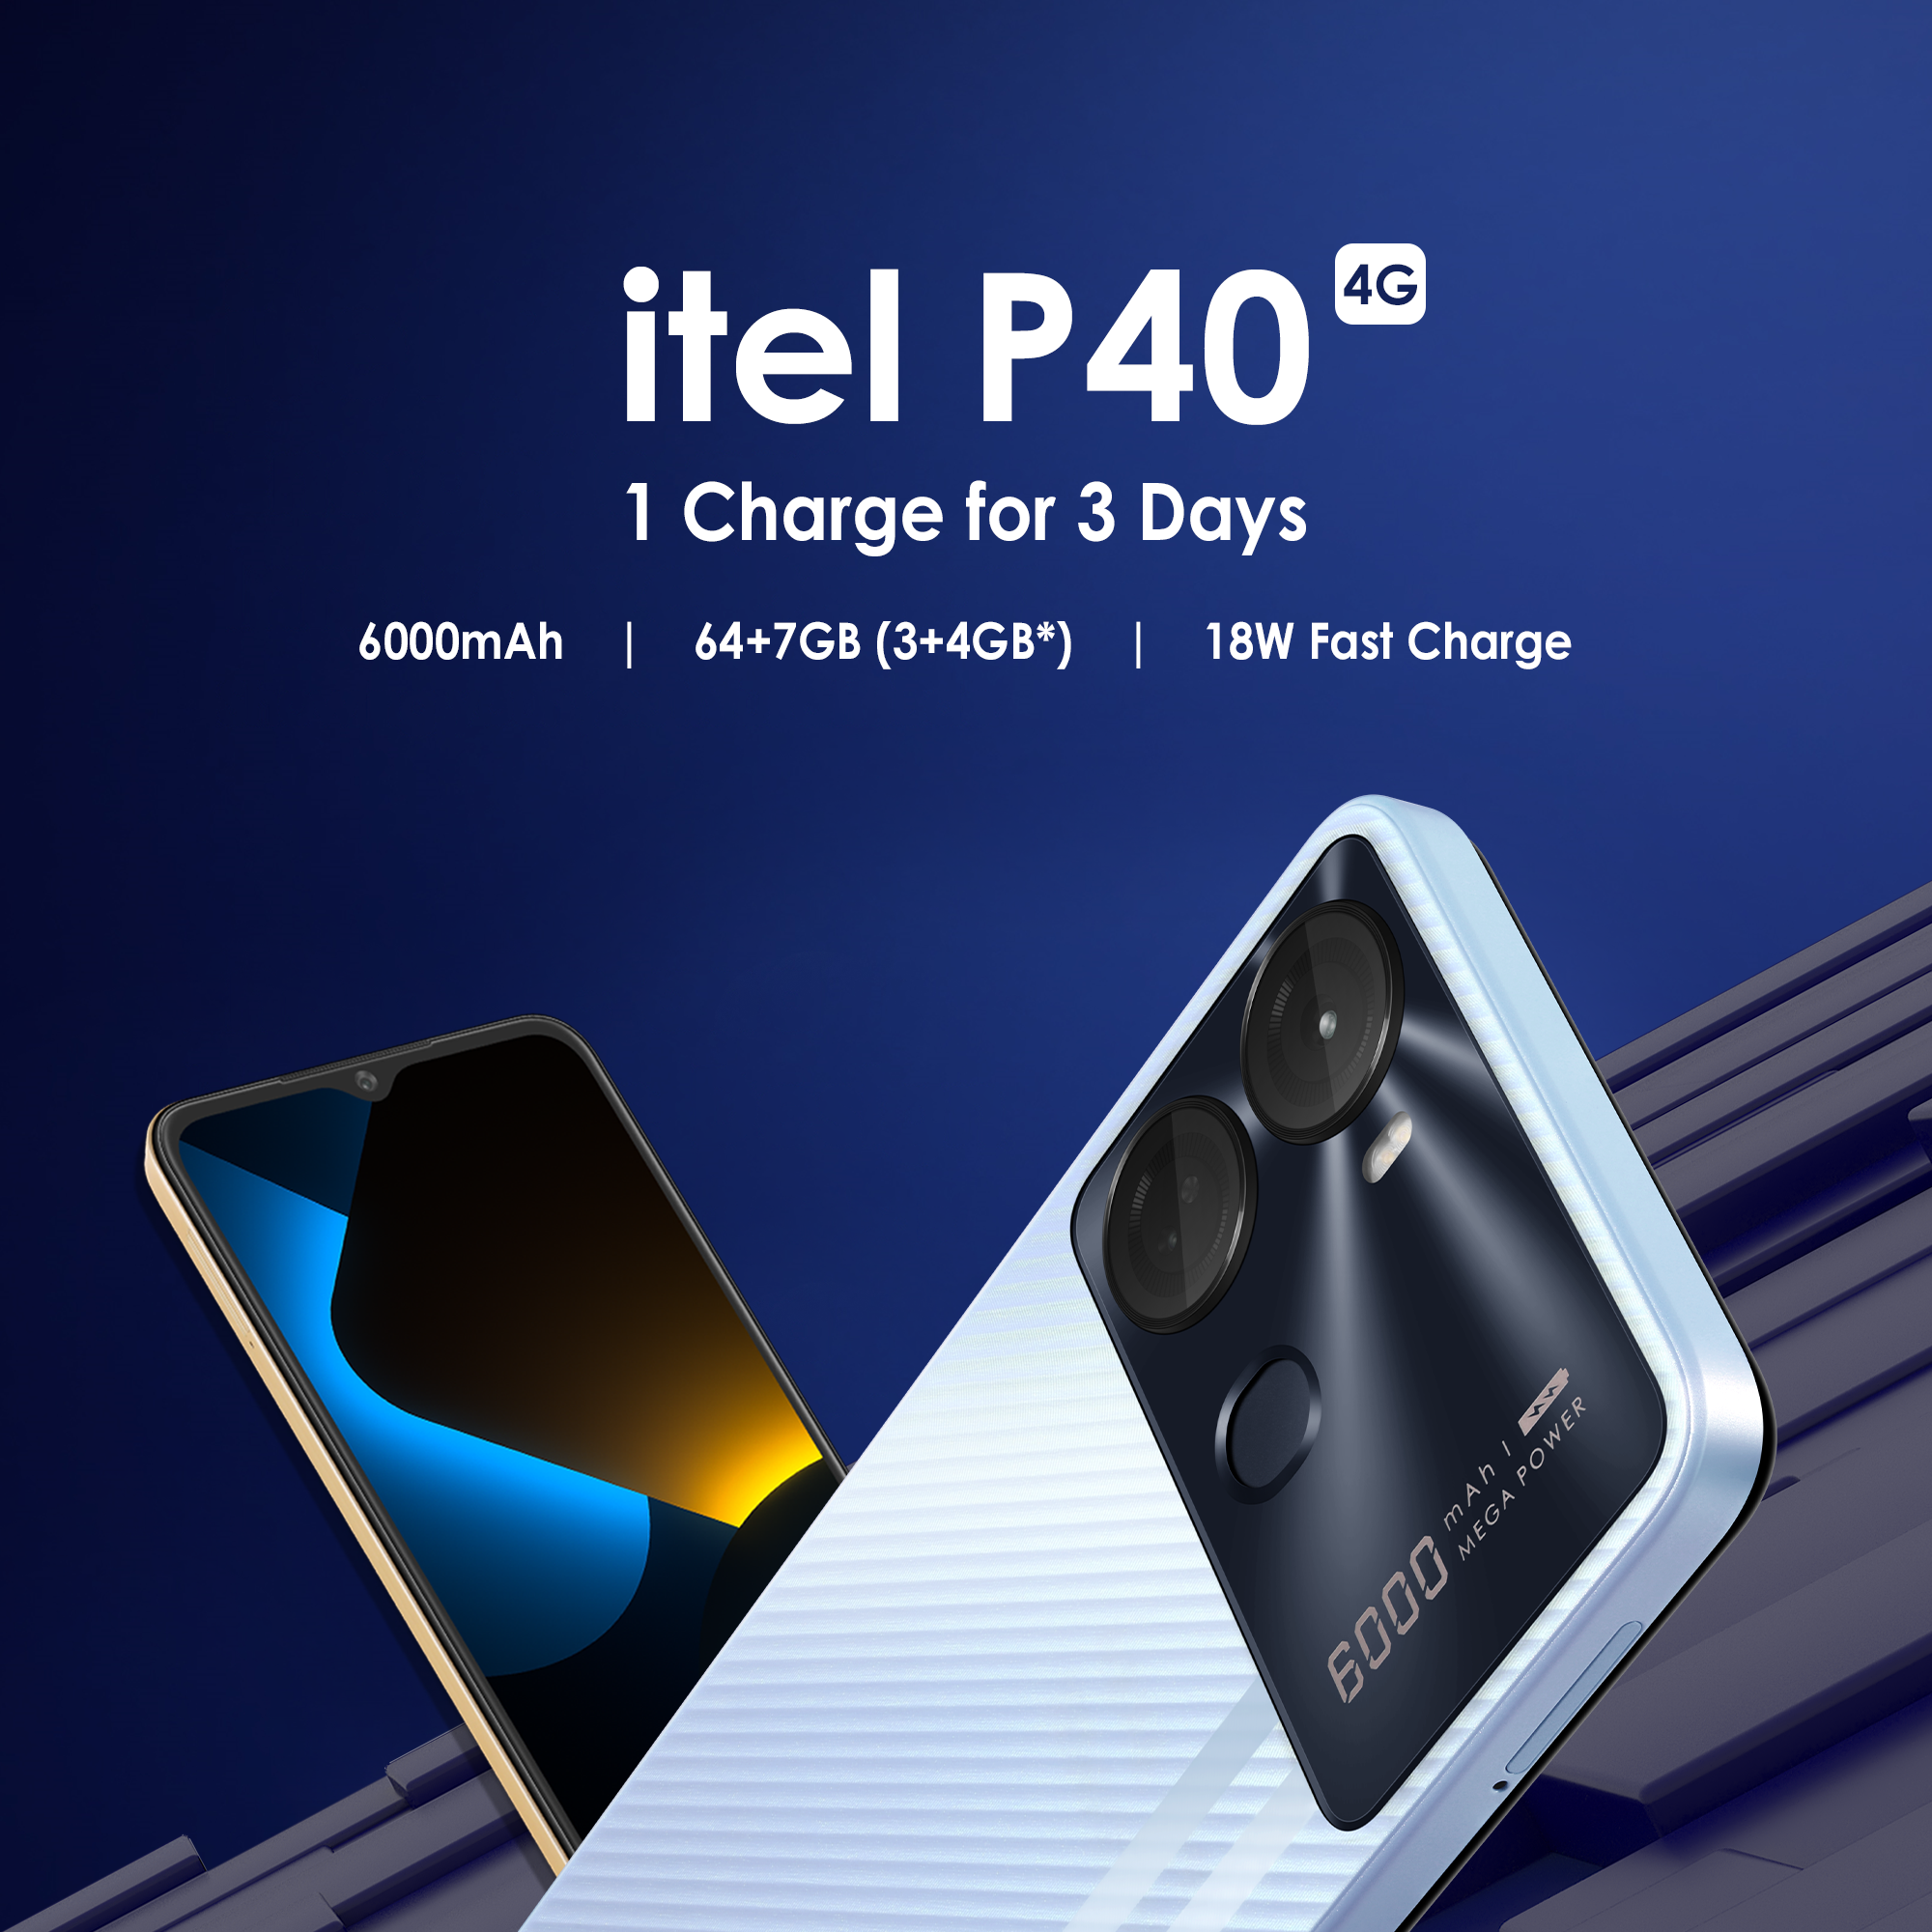 iTel Launches Newest 4G P40 Smartphone Featuring Powerful Performance